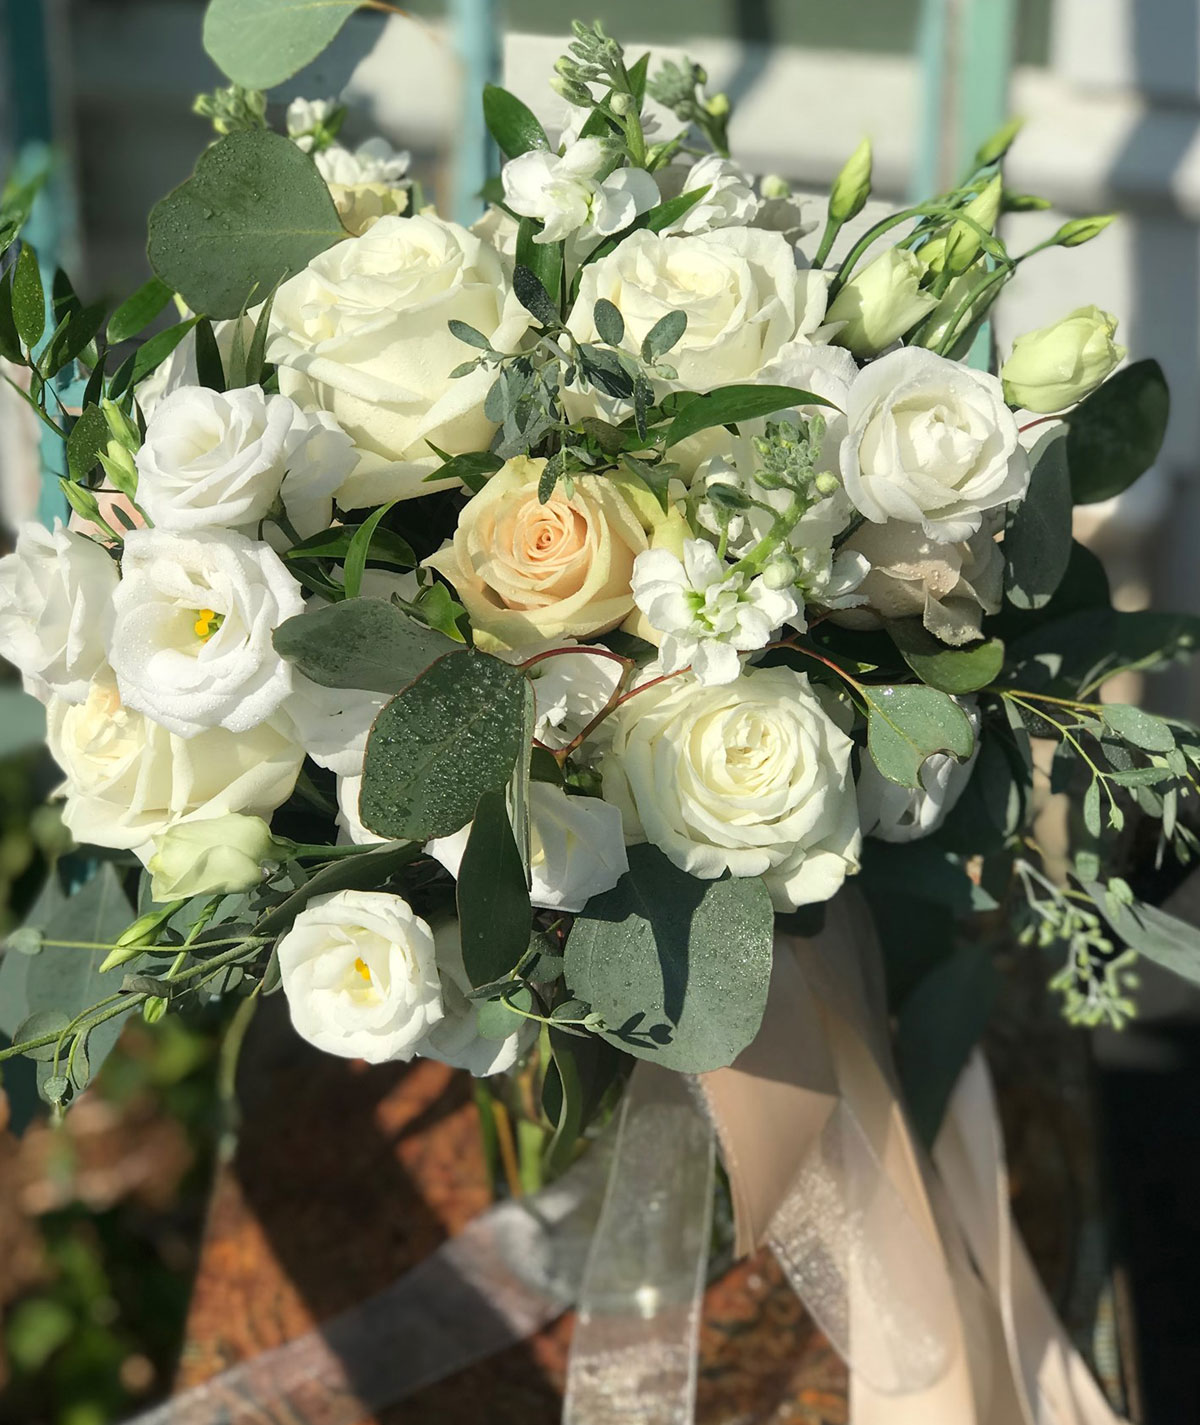 Bridal bouquet, white flowers with silvery green eucalyptus